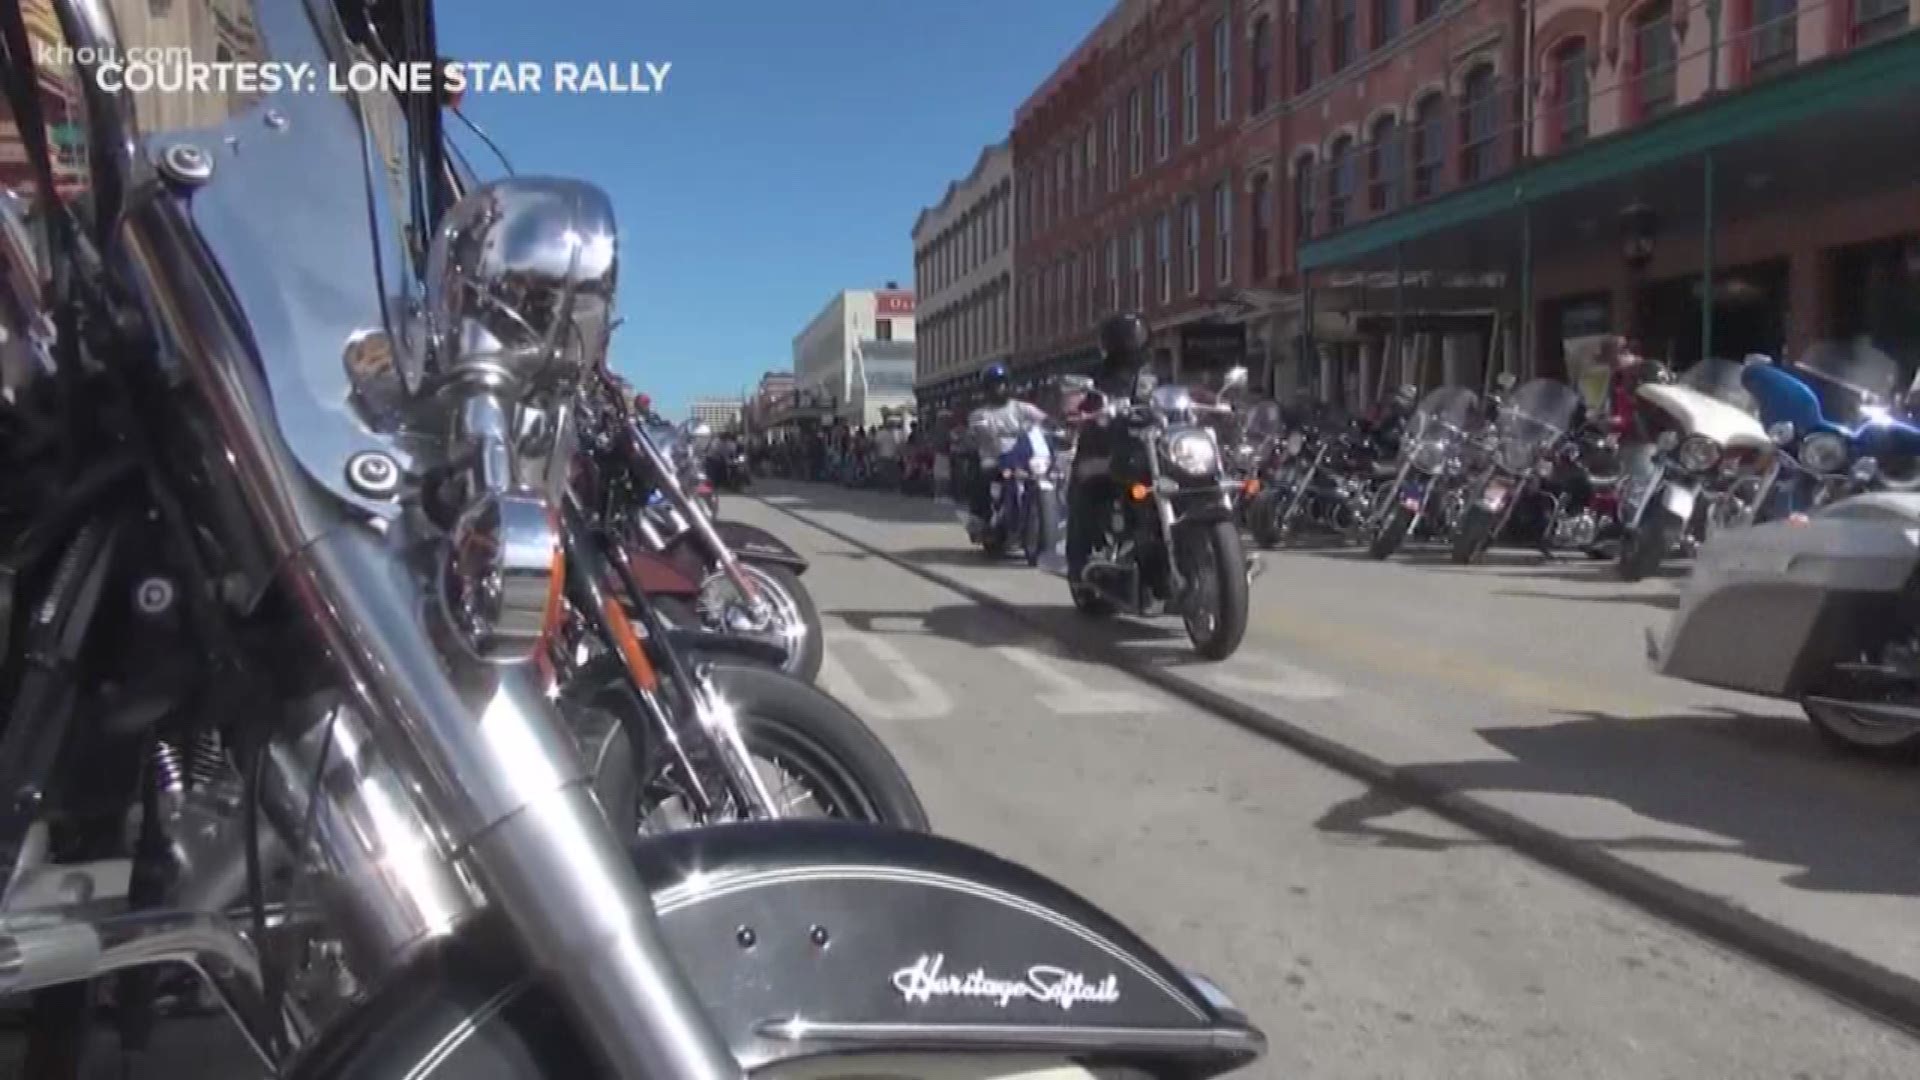 The annual biker event is expected to attract 400,000 visitors.